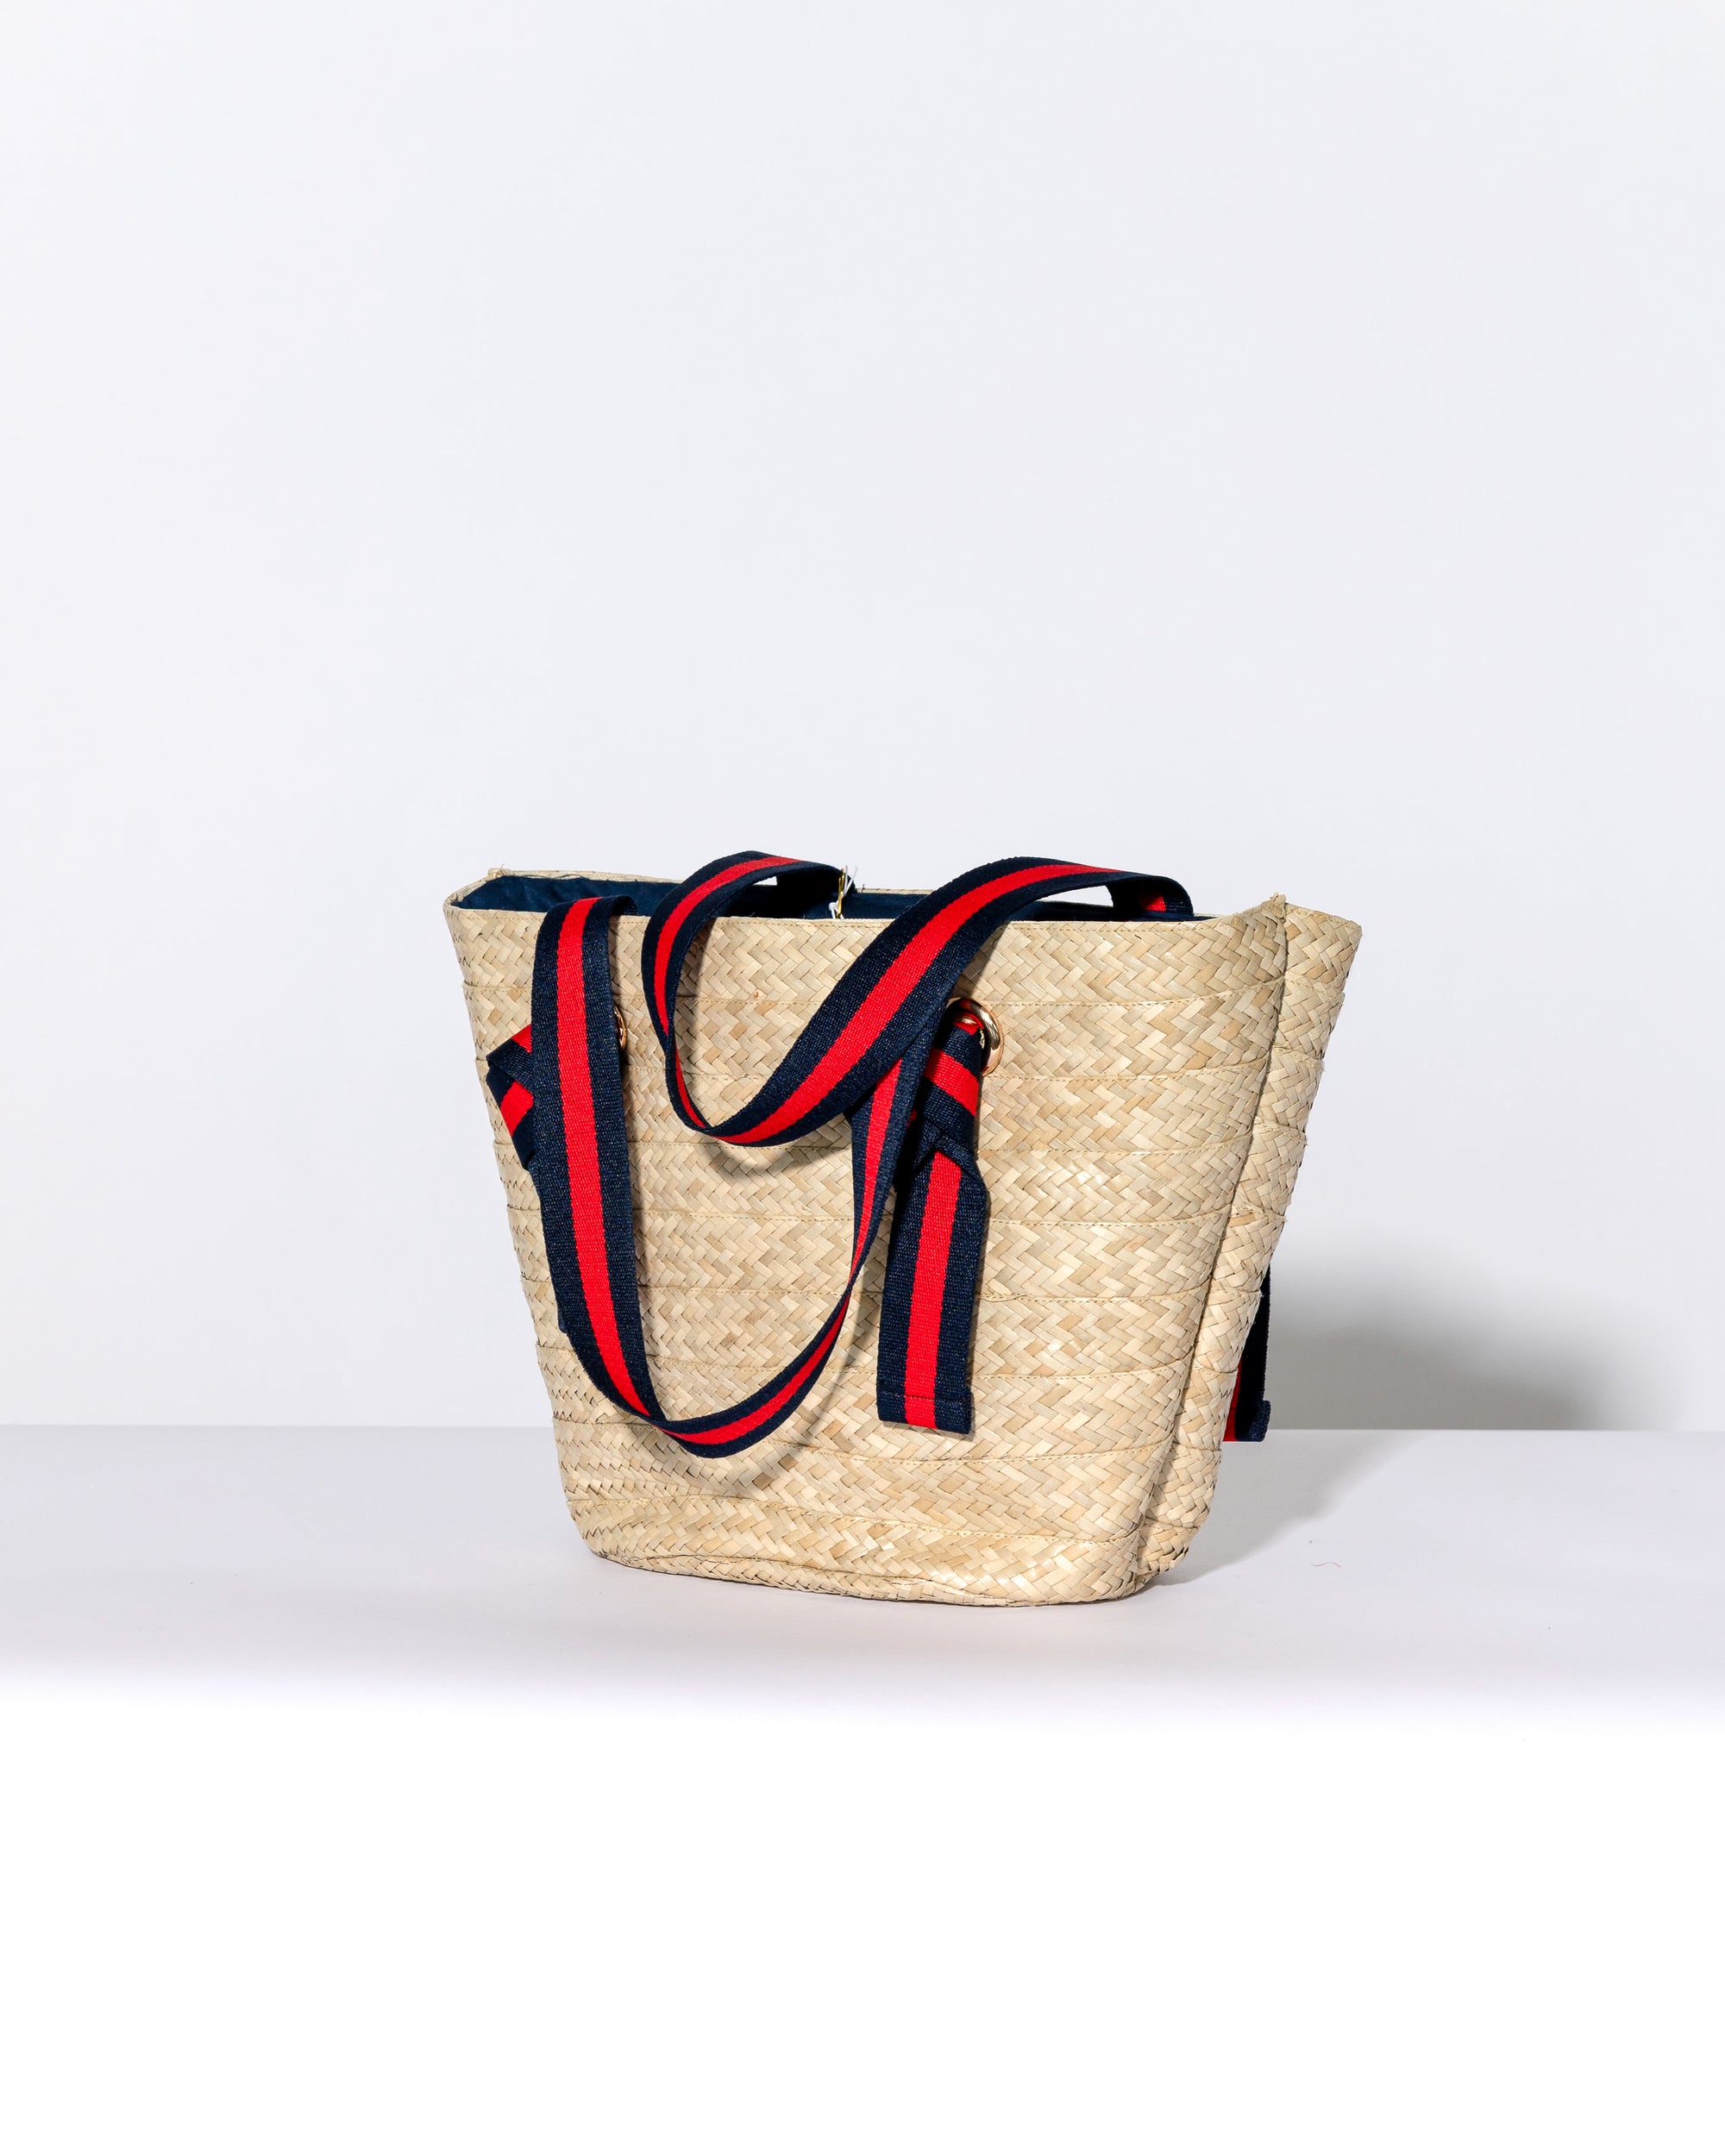 Ashley Tote - Navy & Red